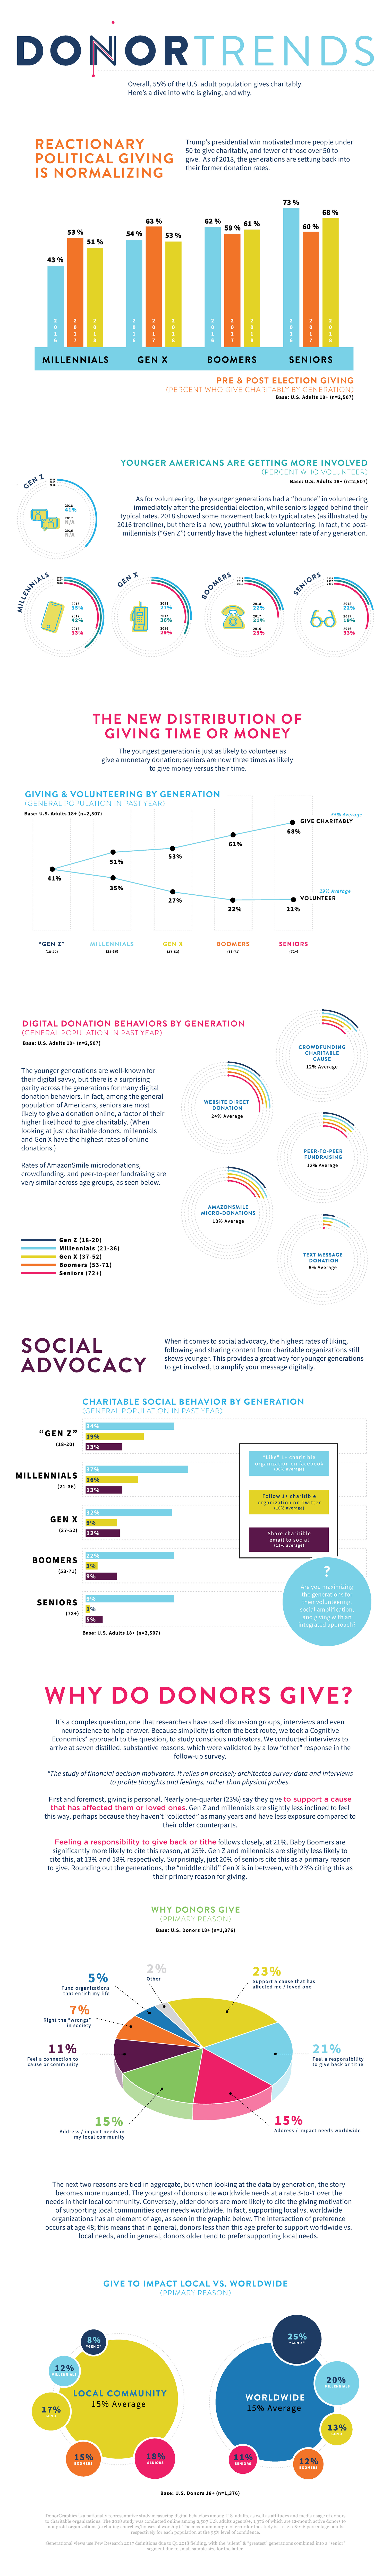 Infographic going into detail about how different generations donate. It goes in-depth on the donor trends for seniors, boomers, gen x, millenials, and gen z.